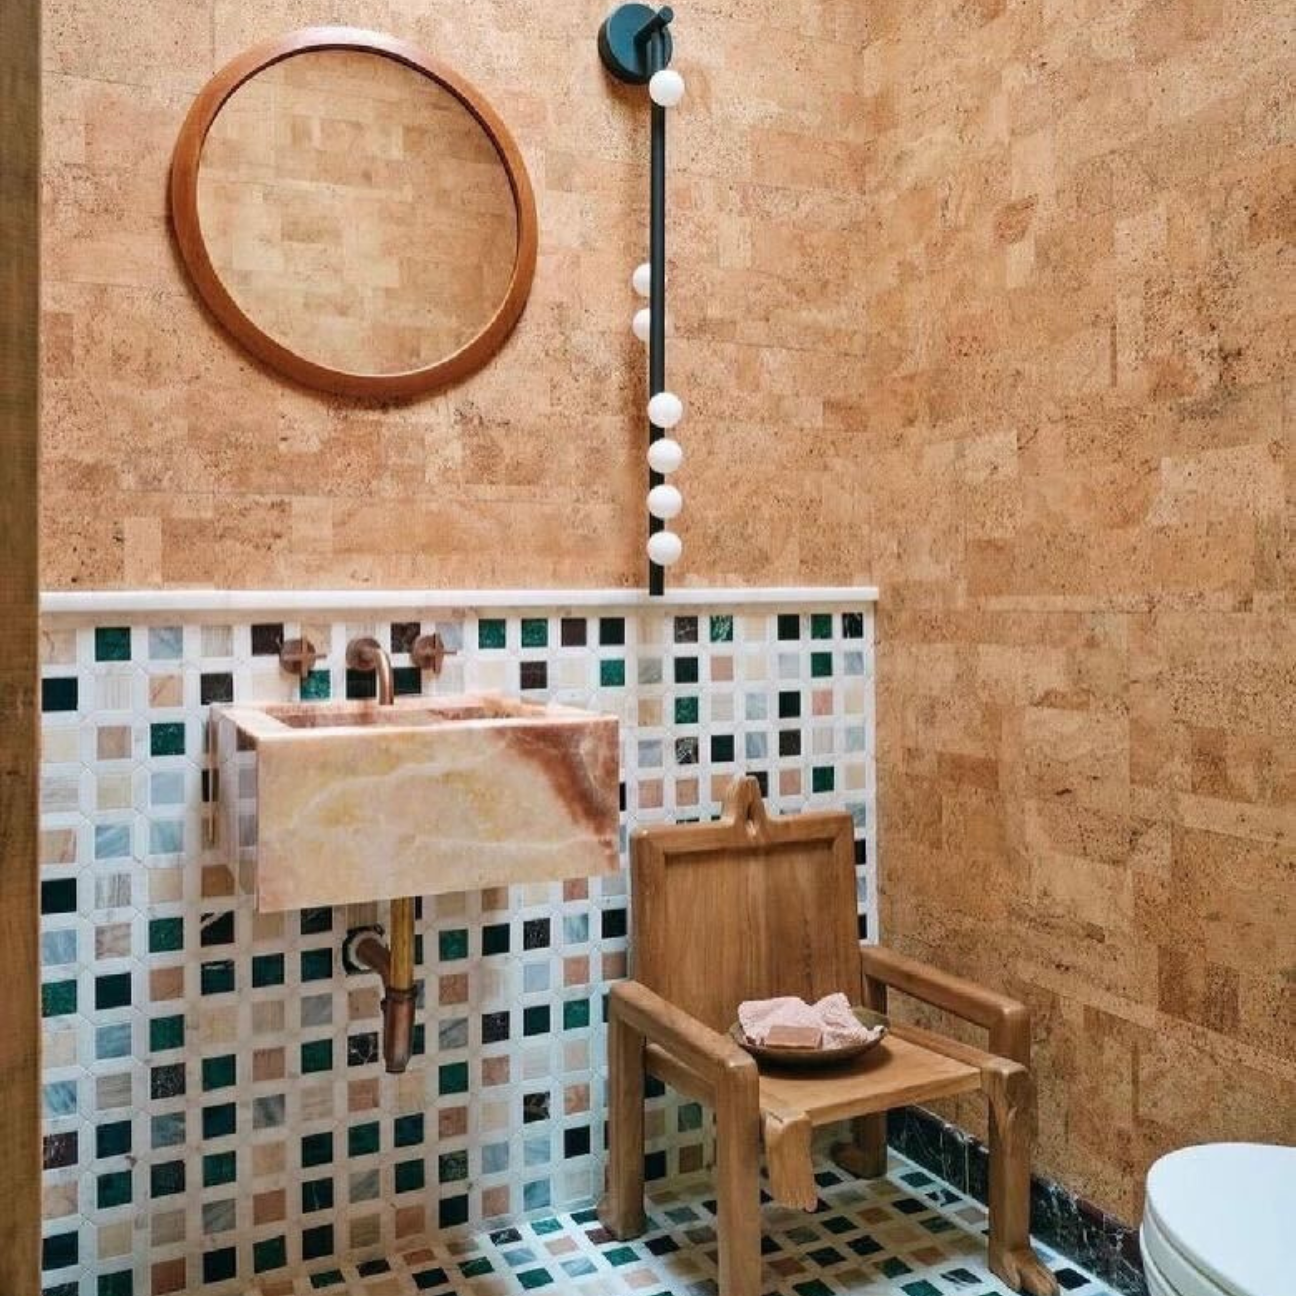 A half bath with teal tan and blue tile floor and part of the wall with the rest of the wall being covered in a natural colored cork tile. 